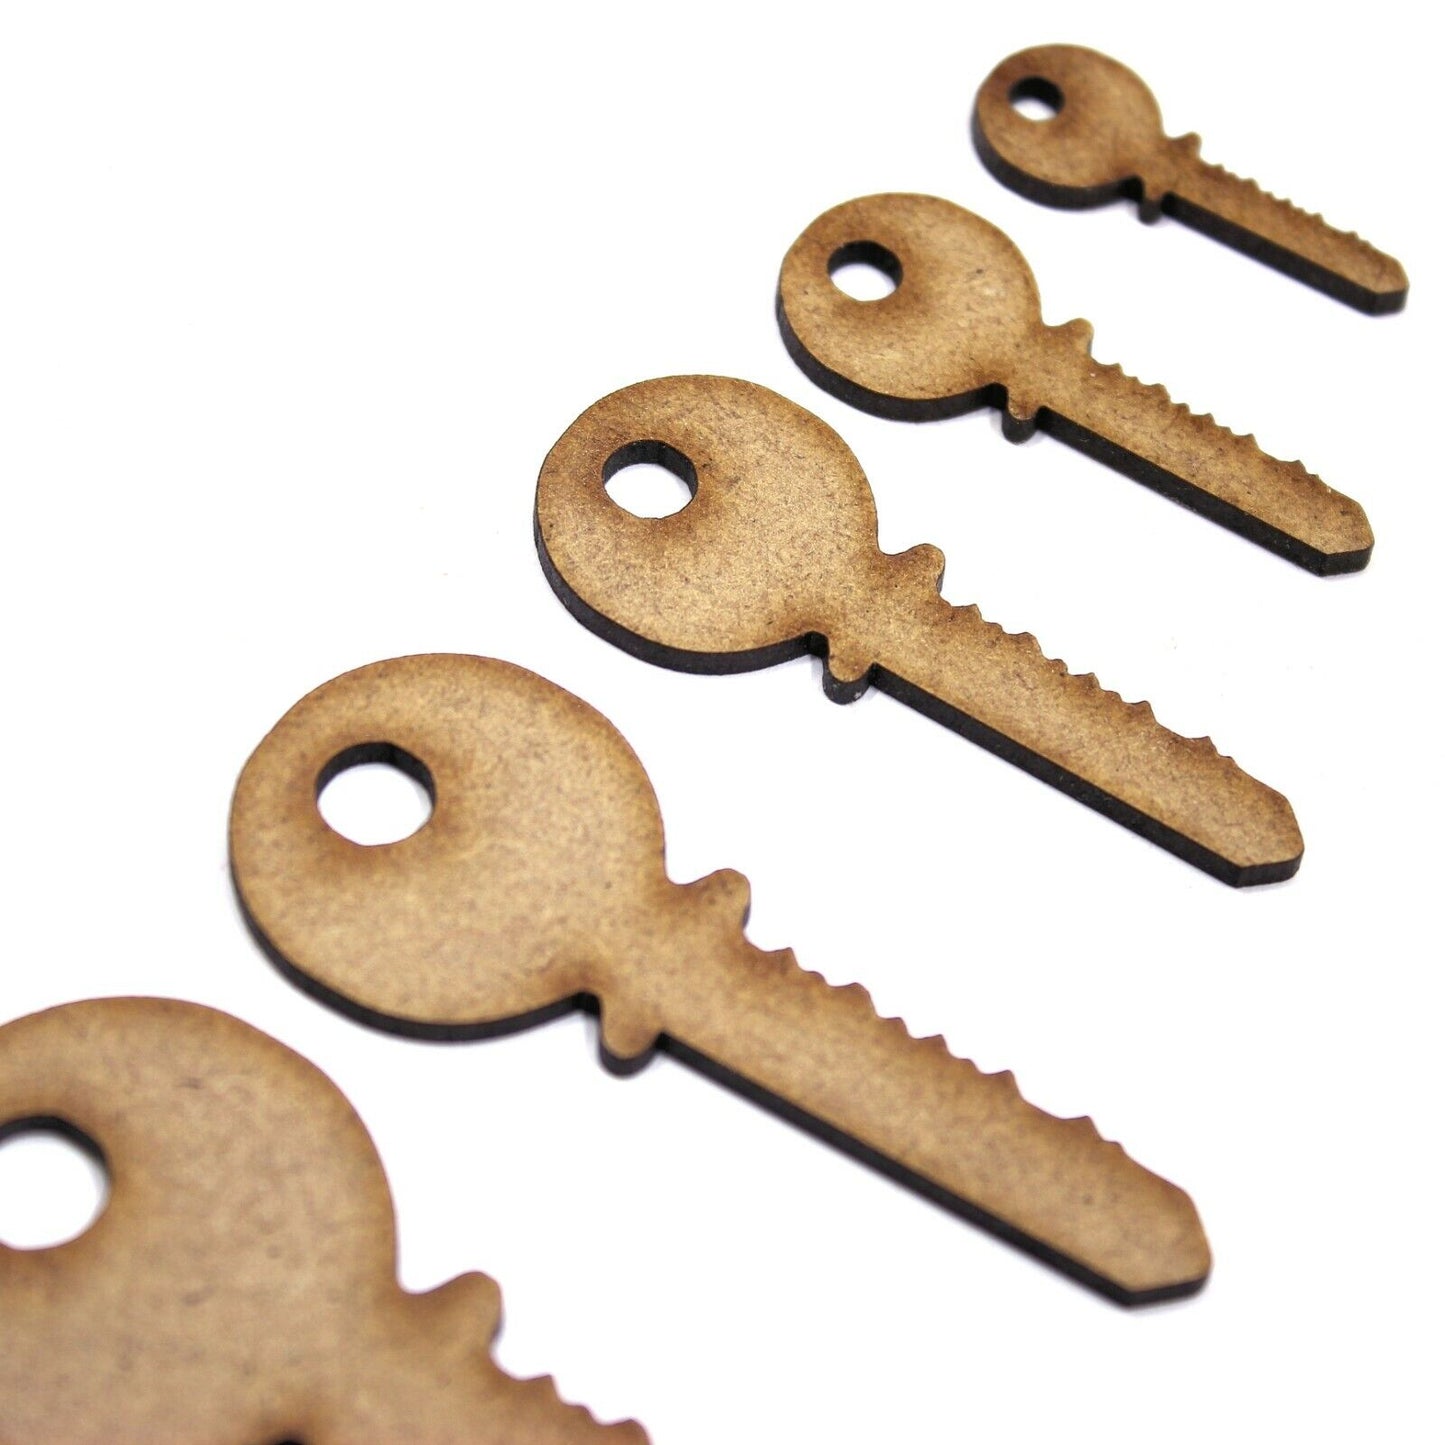 Door Key Craft Shape, Various Sizes, 2mm MDF Wood. 21st, New Home, House